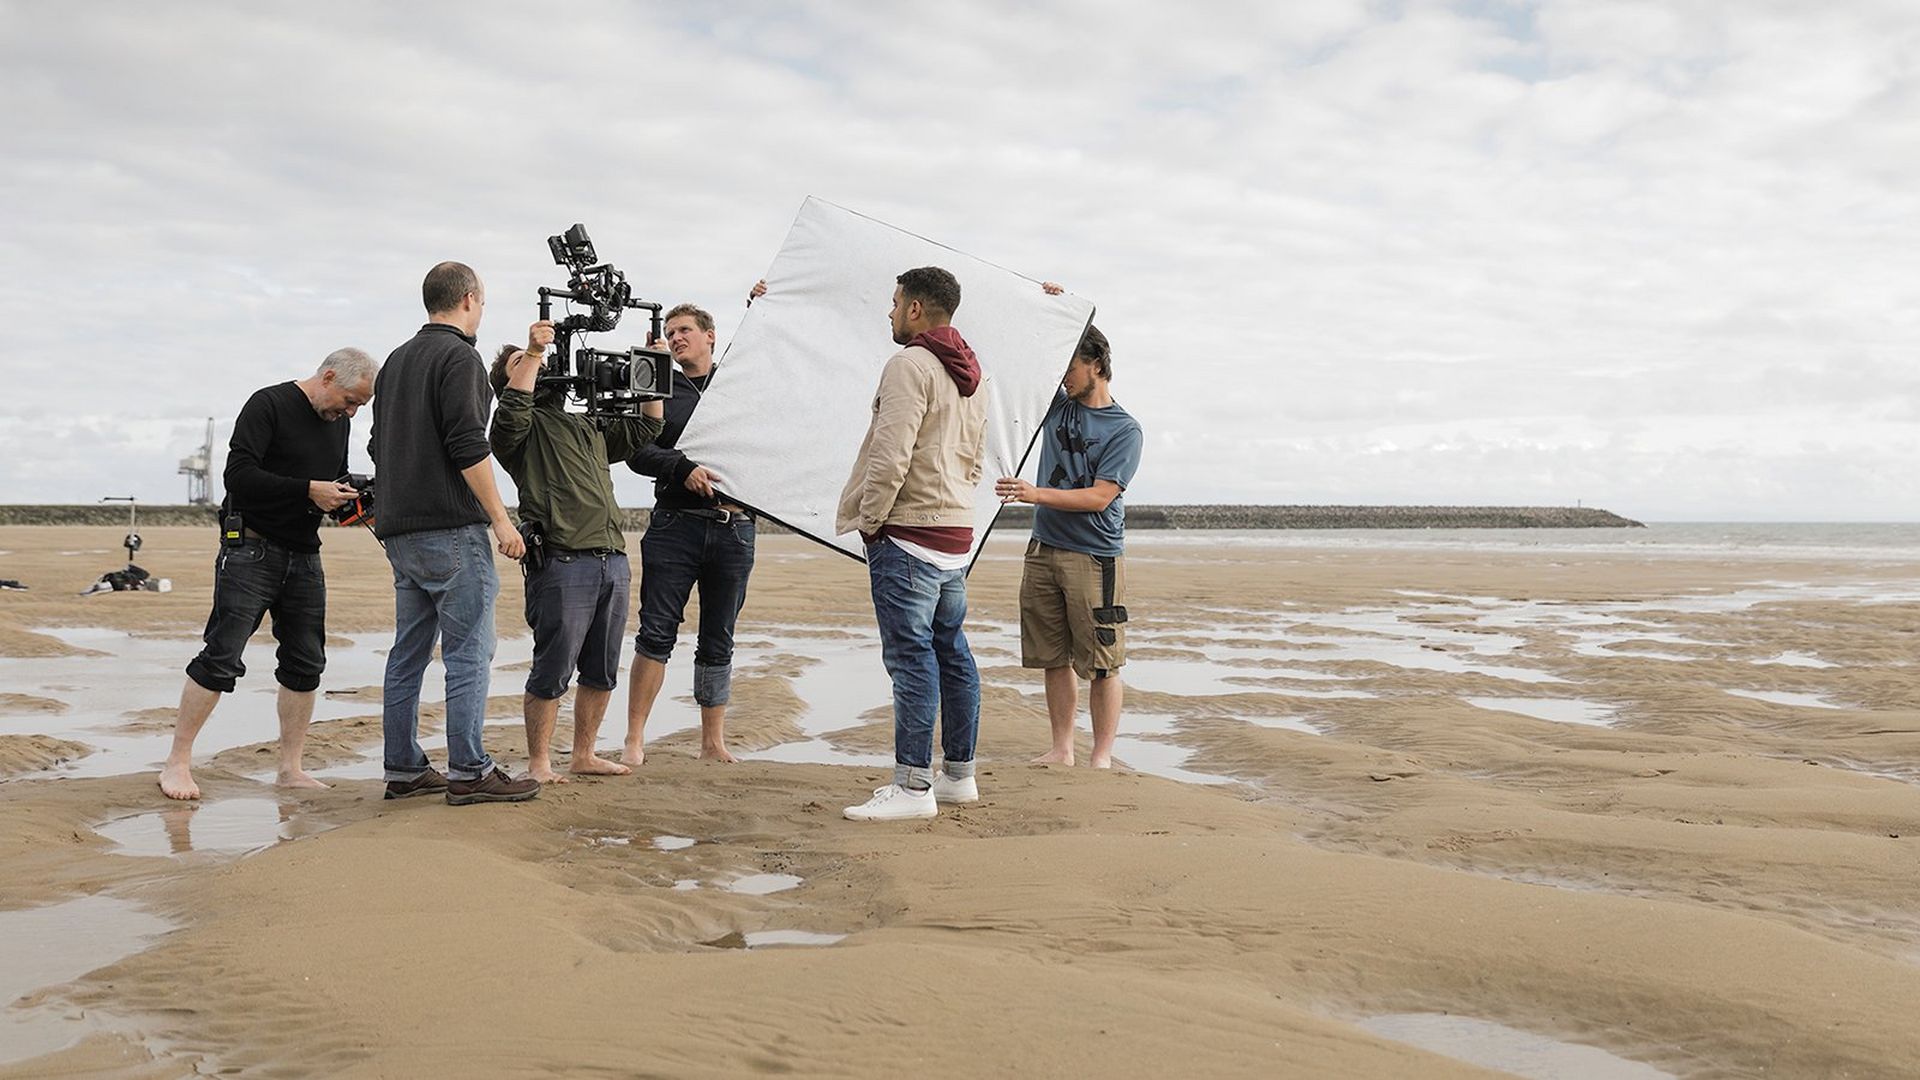 Filming with the й on a beach